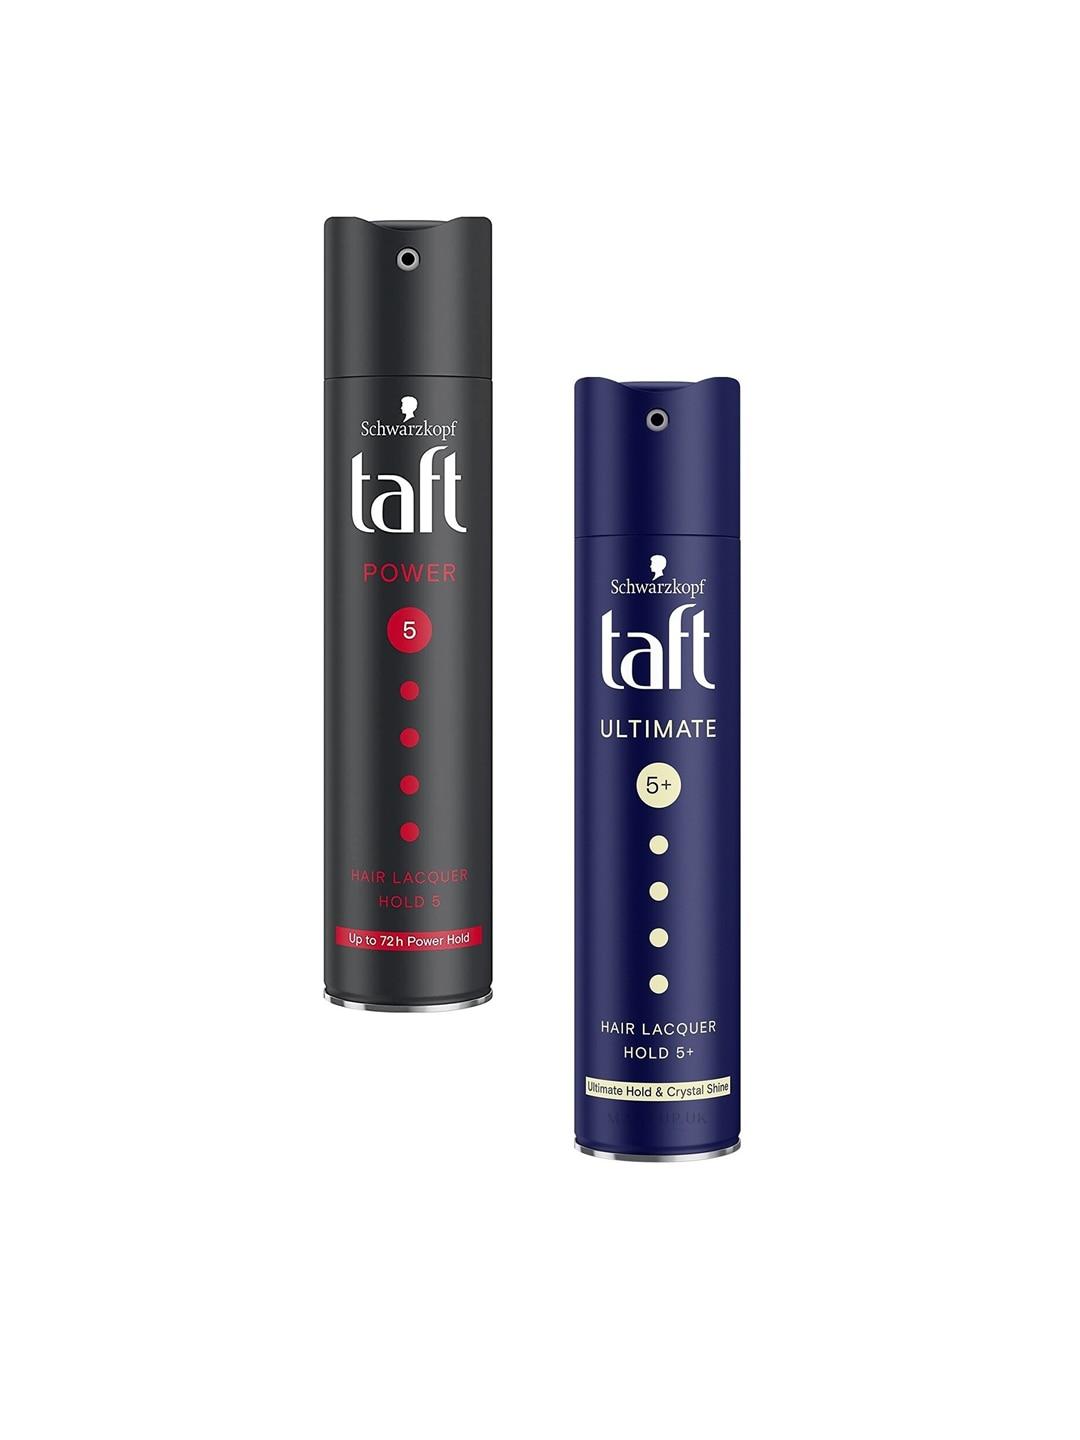 taft Set of Power 5 & Ultimate 5+ Hair Lacquer - 250 ml each